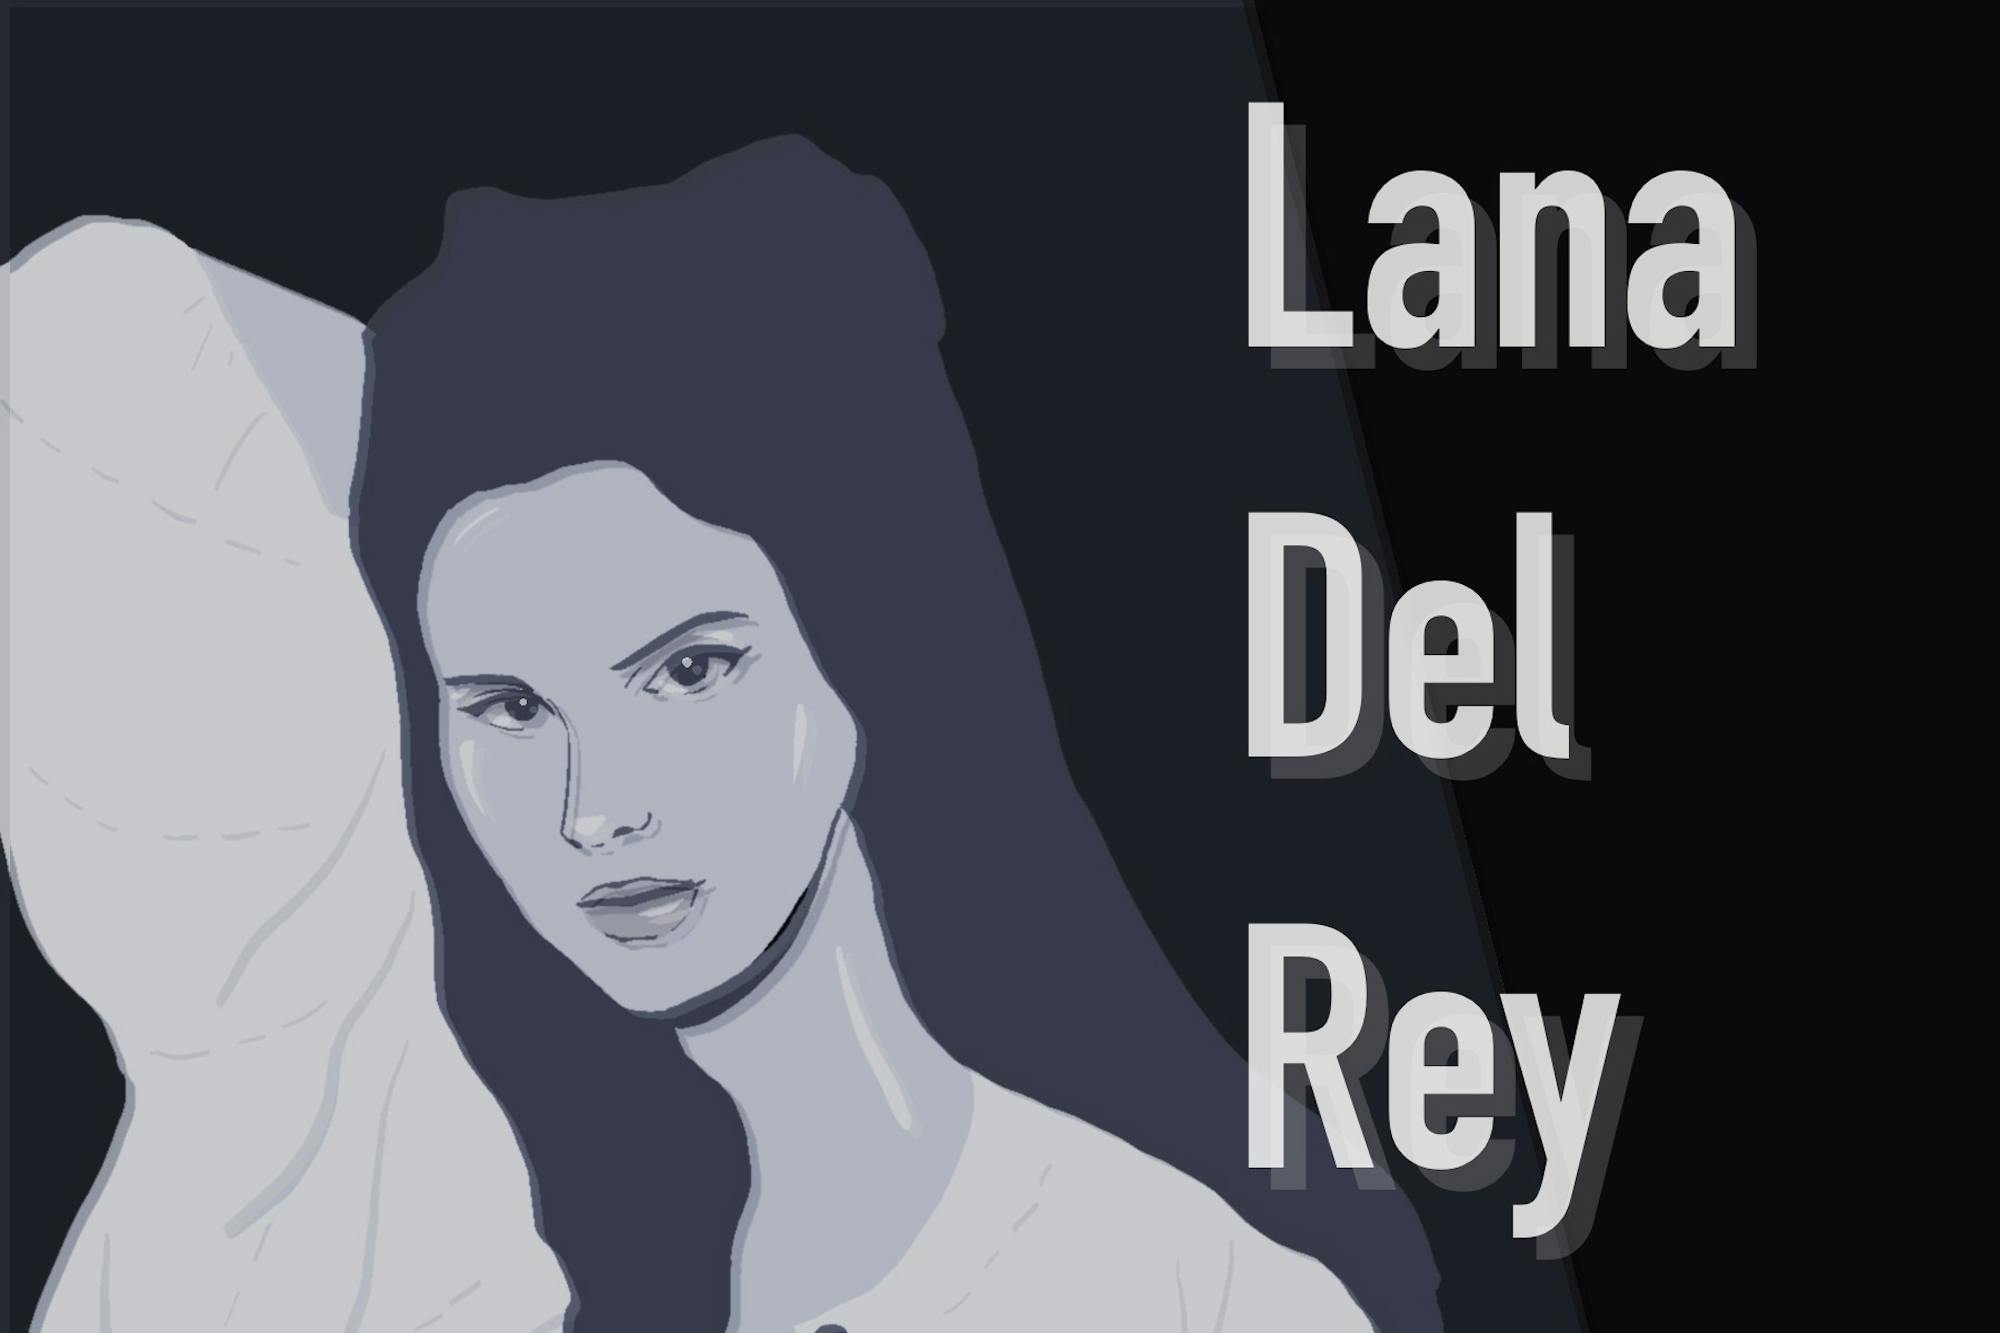 DEL REY,LANA - DID YOU KNOW THAT THERE'S TUNNEL UNDER OCEAN BLVD